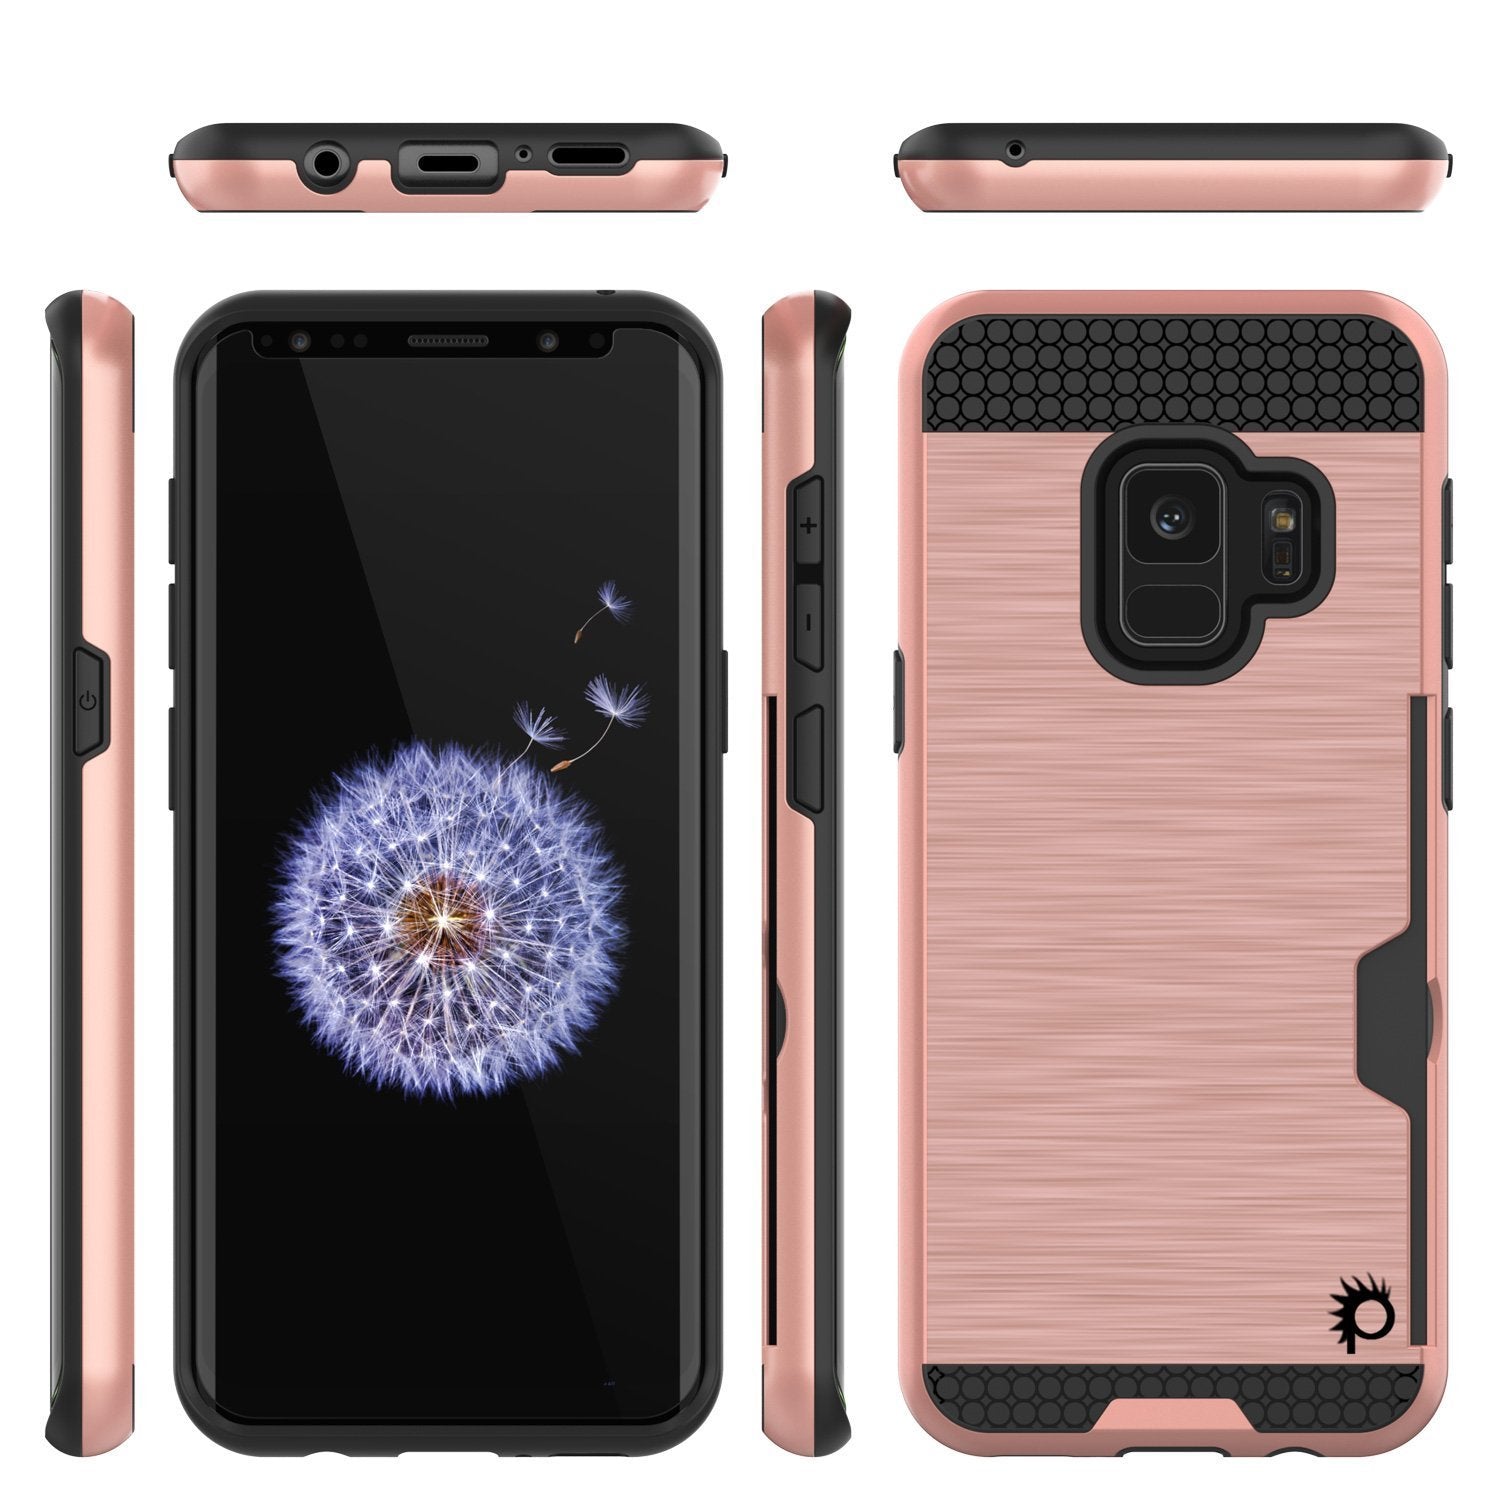 Galaxy S9 Case, PUNKcase [SLOT Series] [Slim Fit] Dual-Layer Armor Cover w/Integrated Anti-Shock System, Credit Card Slot [Rose Gold] - PunkCase NZ